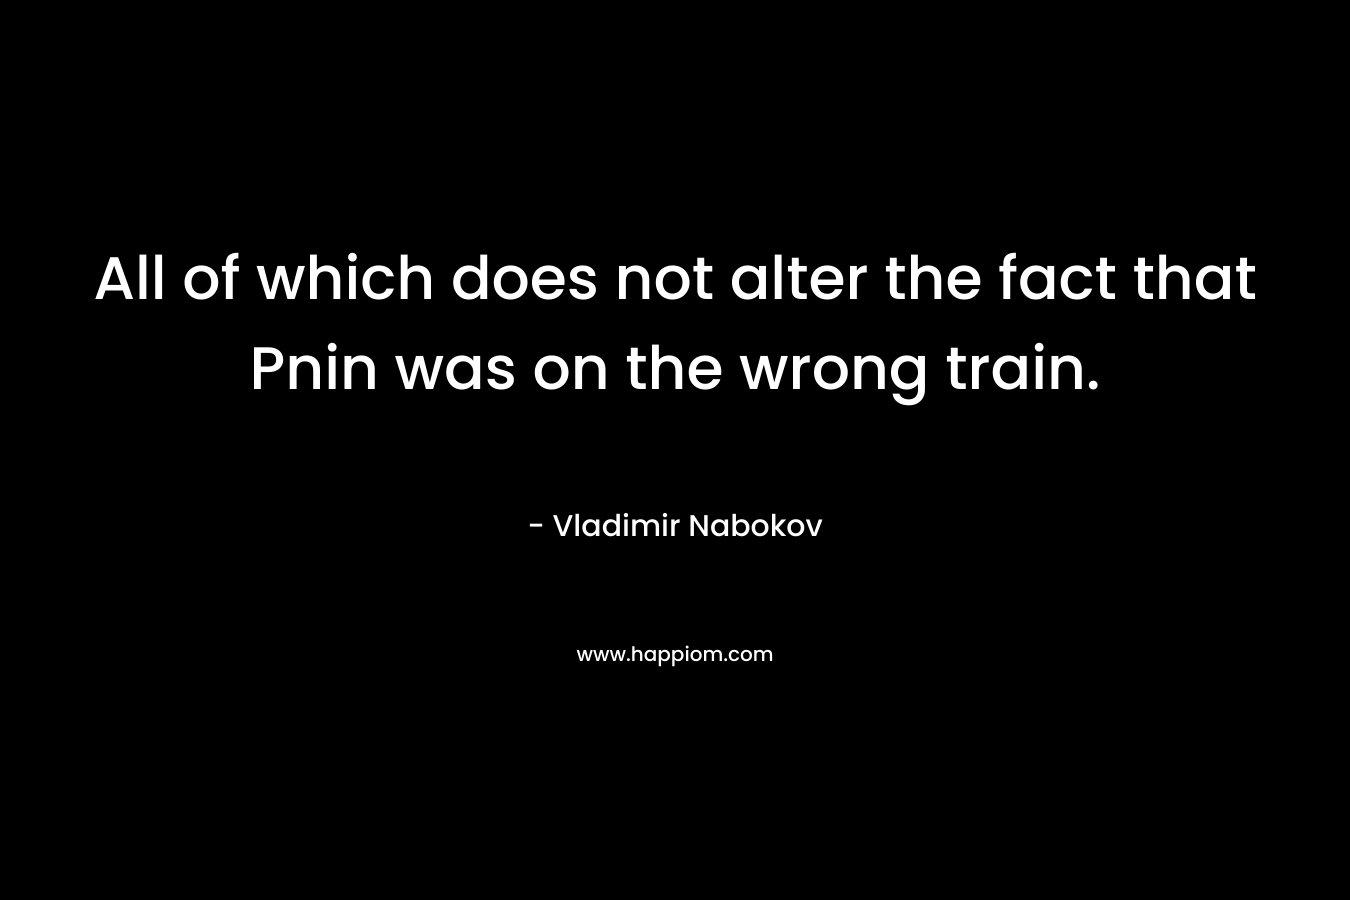 All of which does not alter the fact that Pnin was on the wrong train.